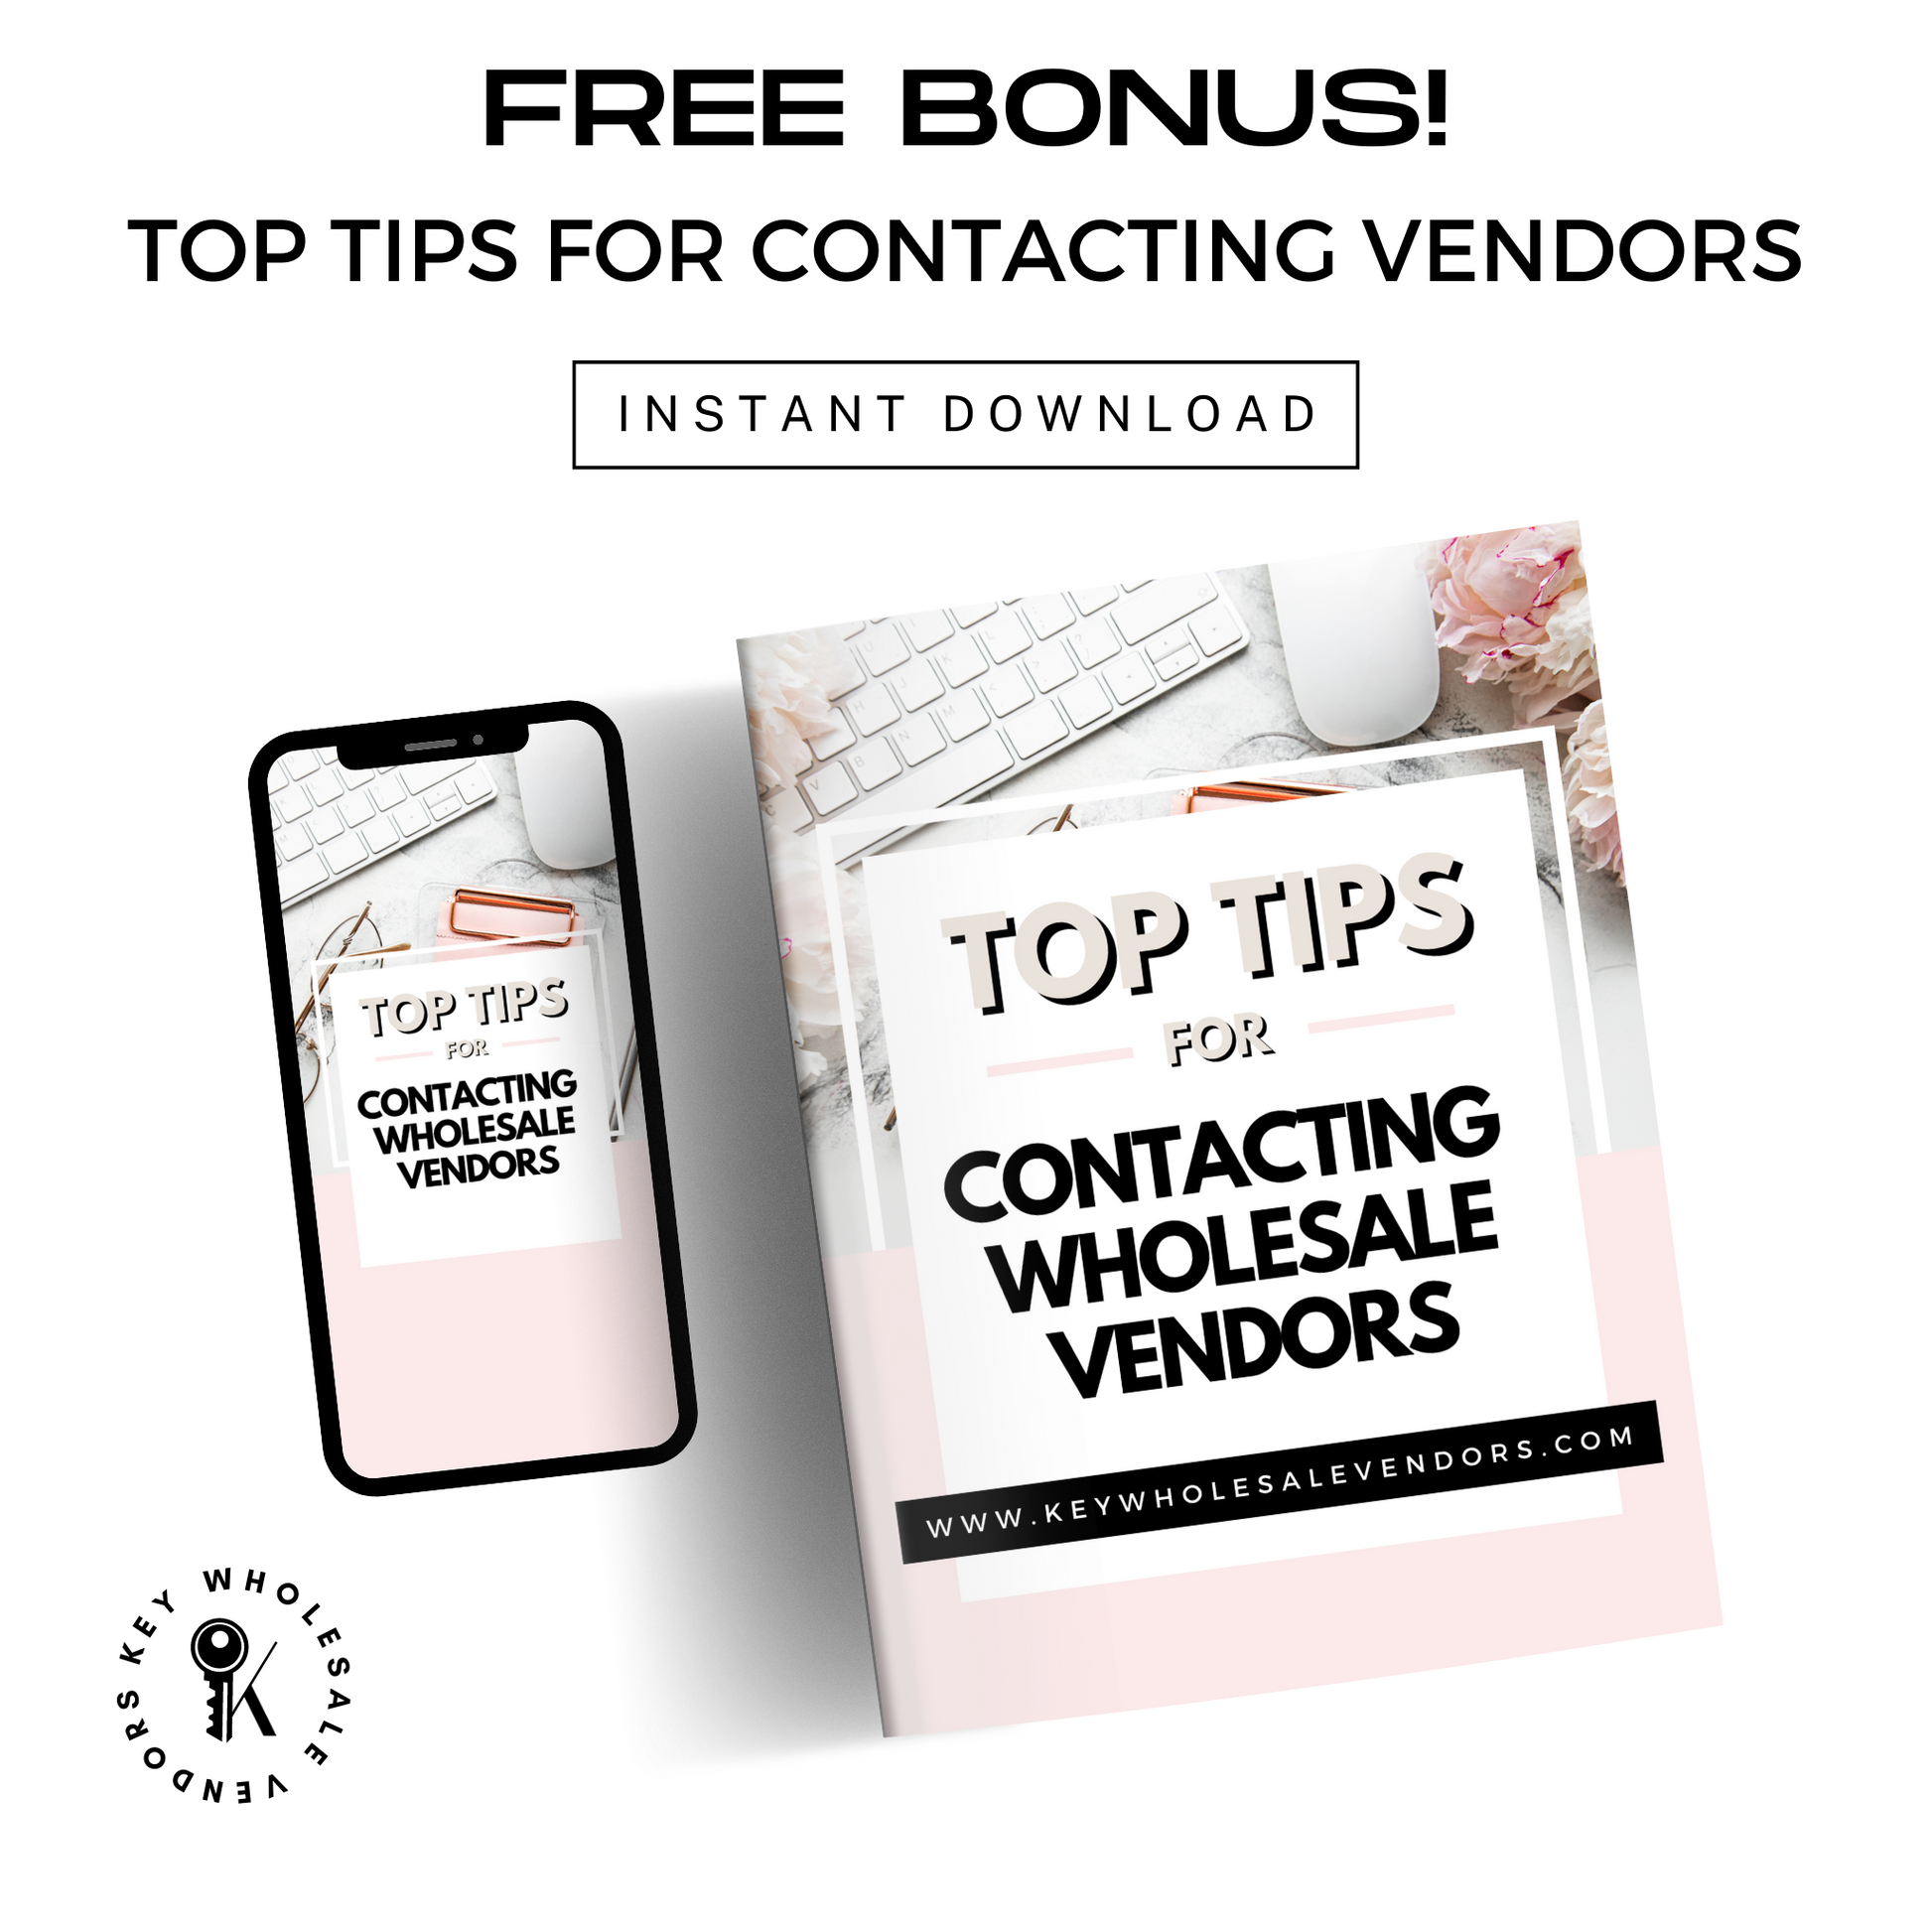 Top Tips for Contacting Wholesale Vendors